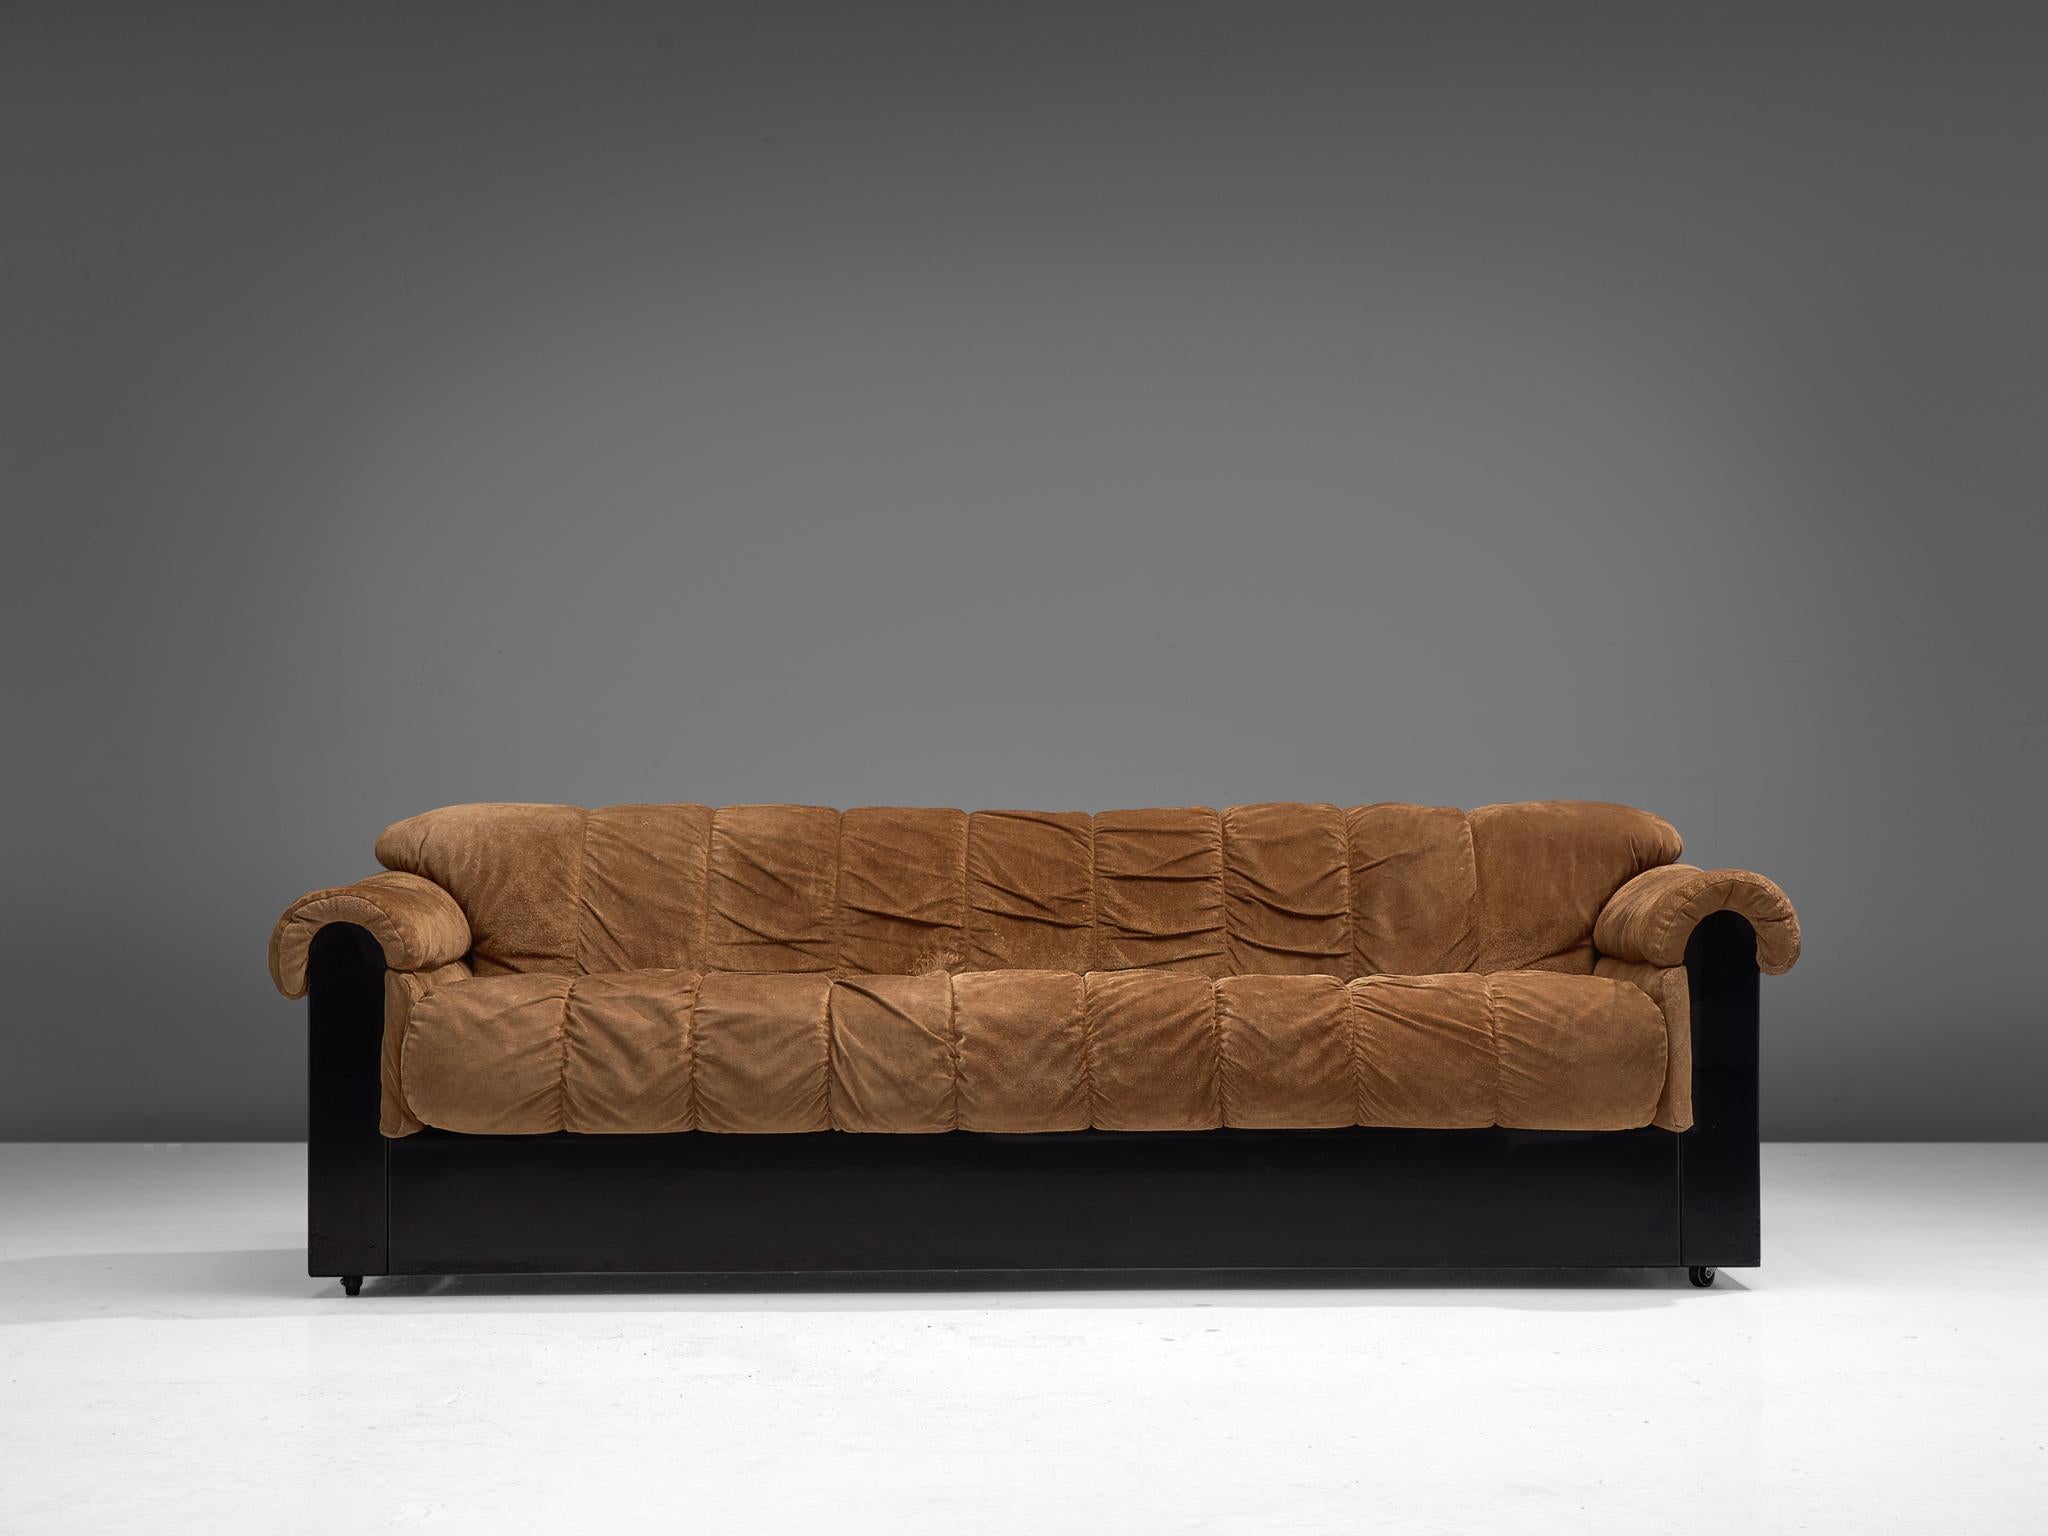 Lorenzo Forges Davanzati for The Pace Collection, sofa, model 'Bounty', alcantara, lacquered polyester, United States, 1980s.

Bulky and sturdy sofa by Italian designer Lorenzo Davanzati and manufactured by the American company The Pace Collection